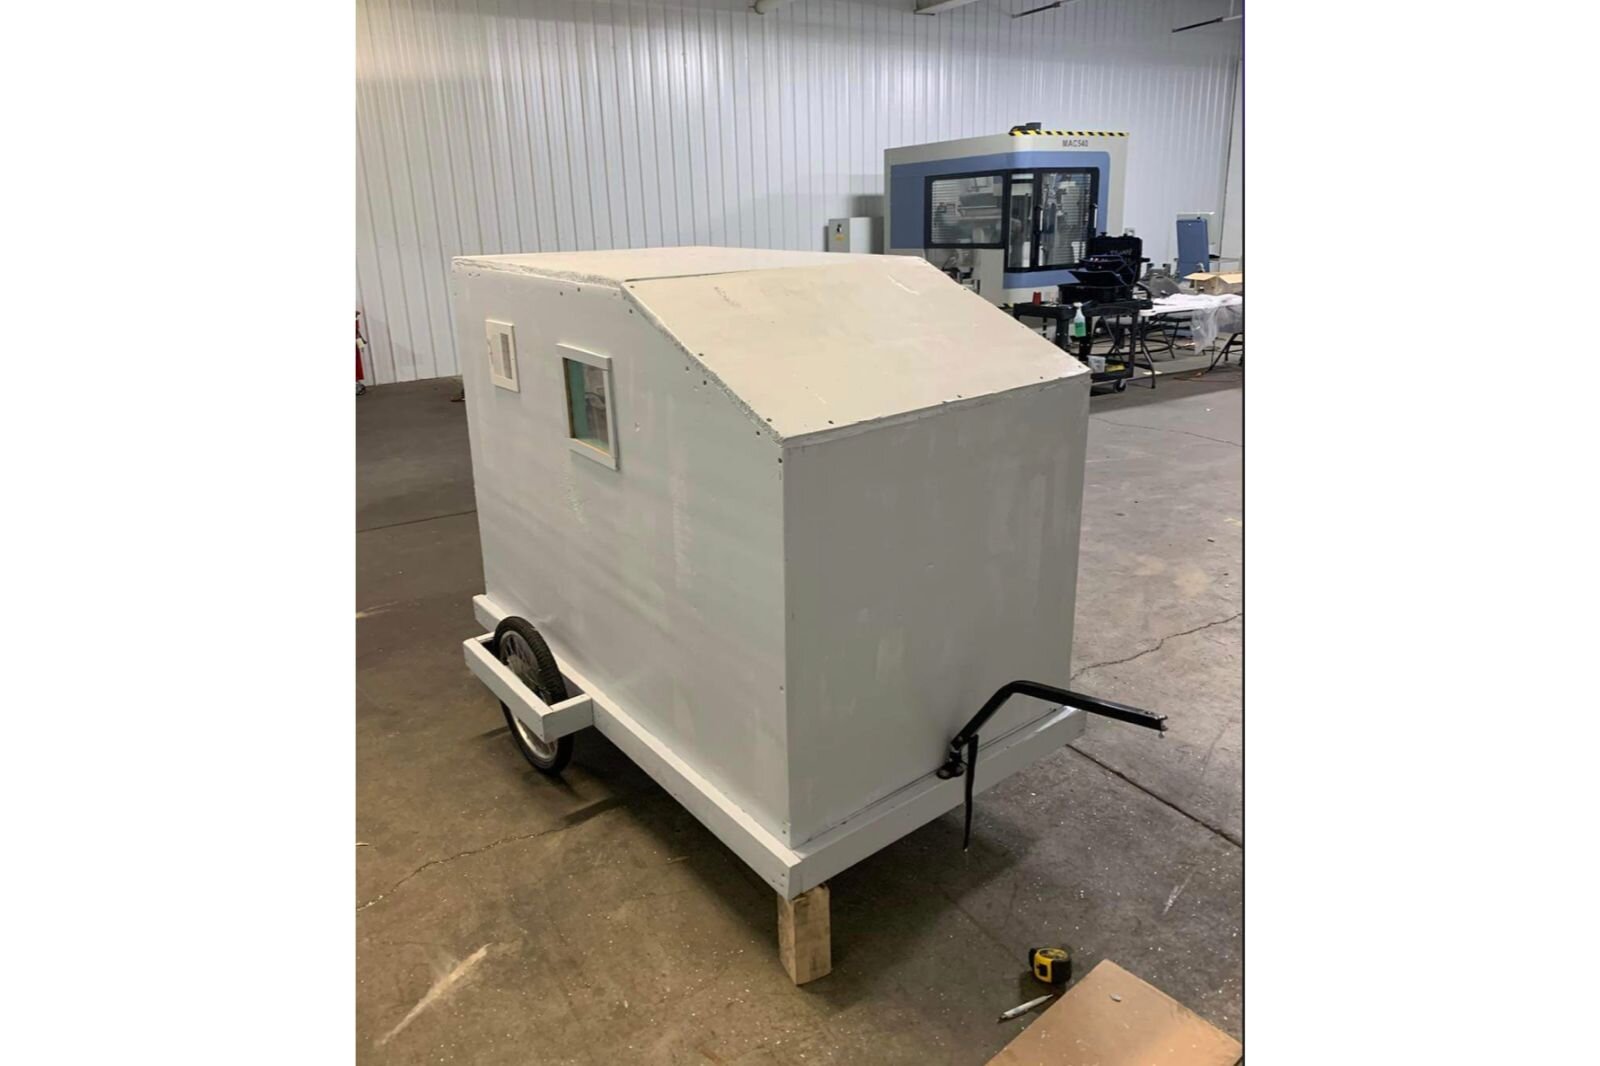 Dignity in Motion is building a bike camper prototype. With insulated walls, vents, windows and a solar charger, it could be towed by bike and used as emergency shelter.